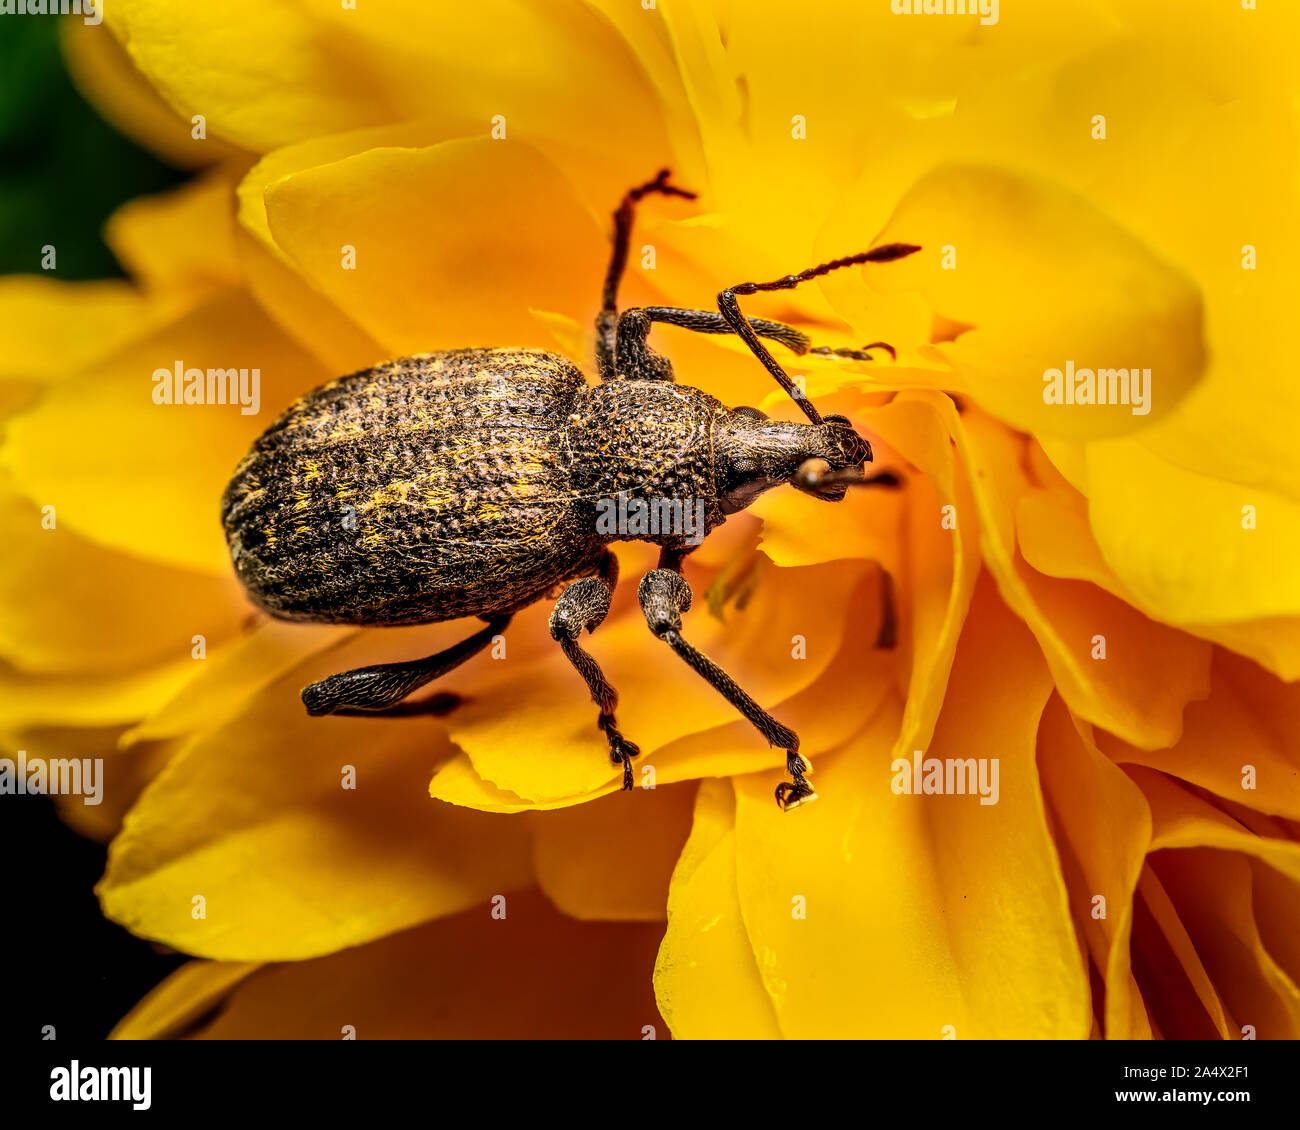 Detailed close up picture of an adult common brown vine weevil photographed in an English garden, Sutton Coldfield, West Midlands, United Kingdom. Stock Photo